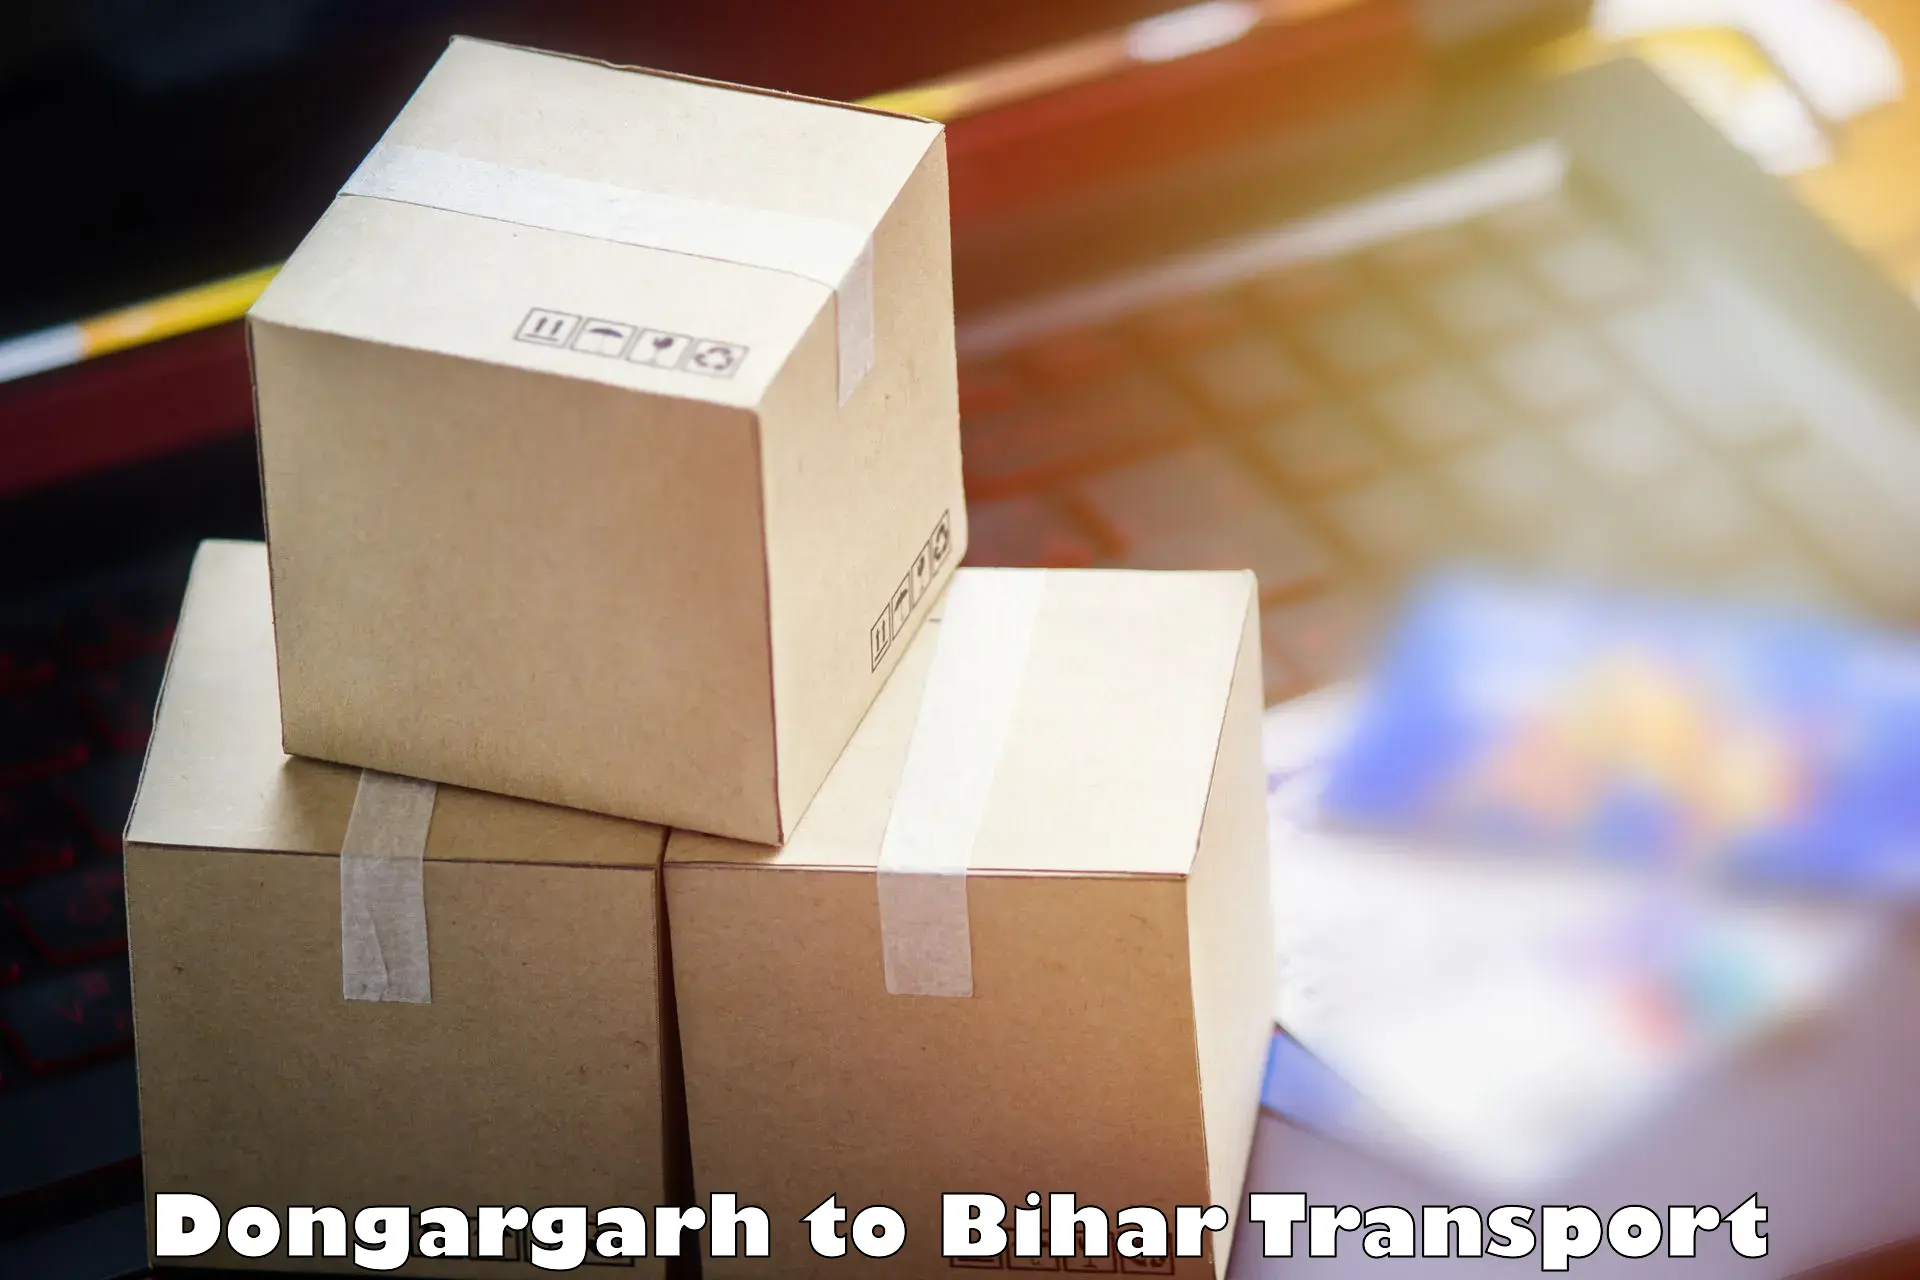 Shipping services Dongargarh to Dehri